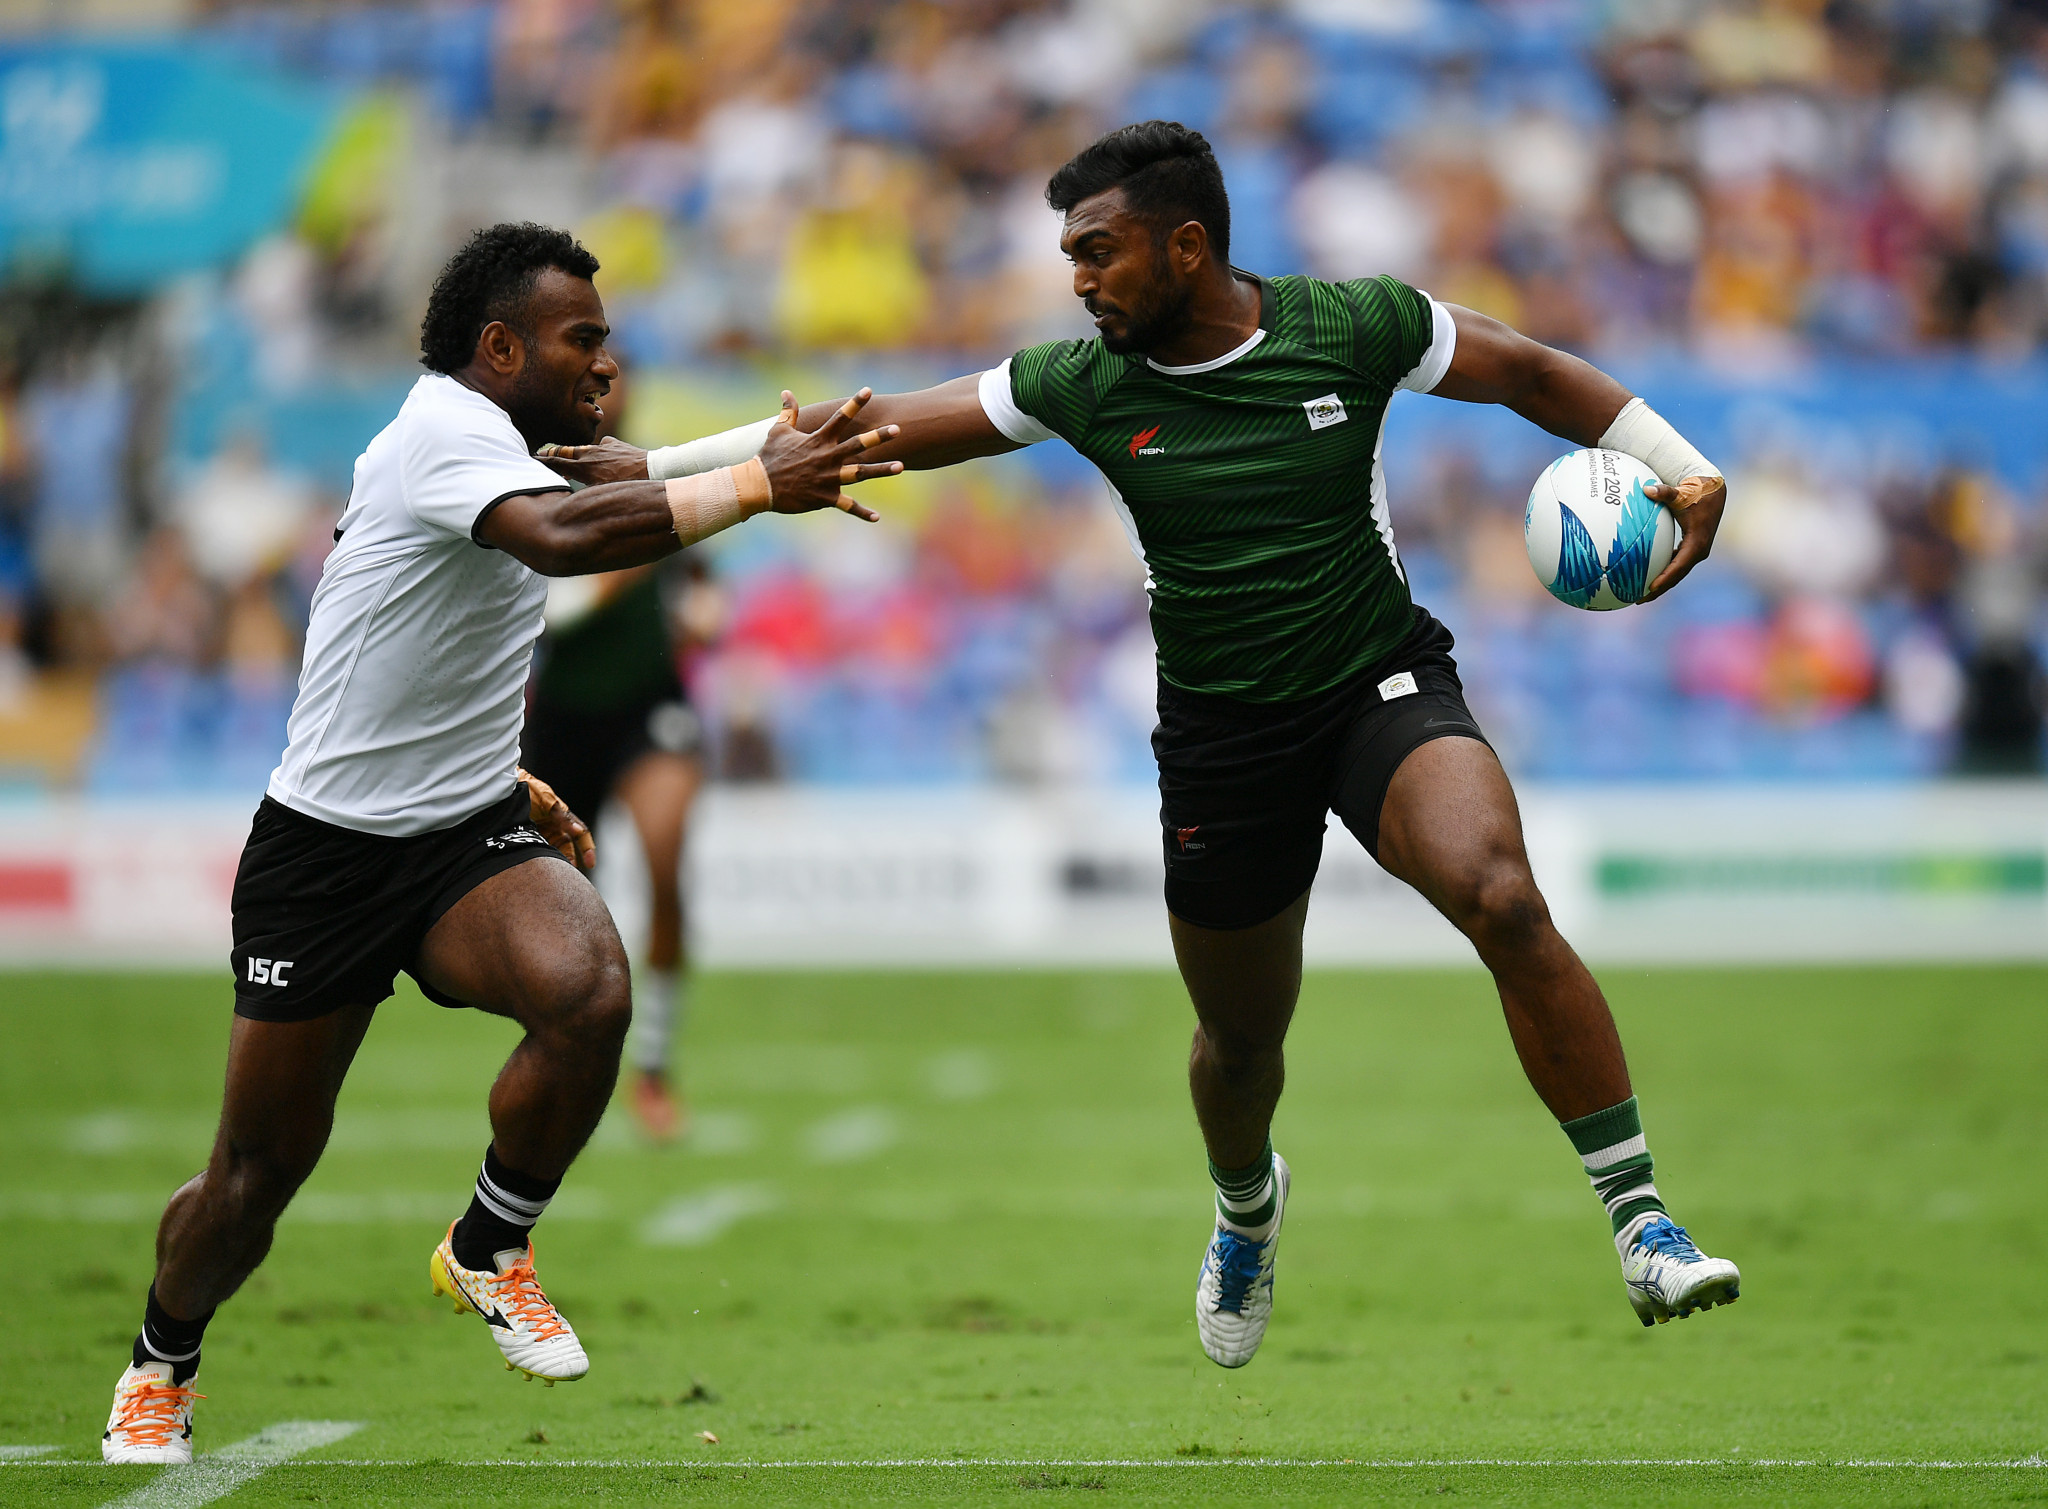 Sri Lankan rugby team to compete as neutrals at Hangzhou 2022